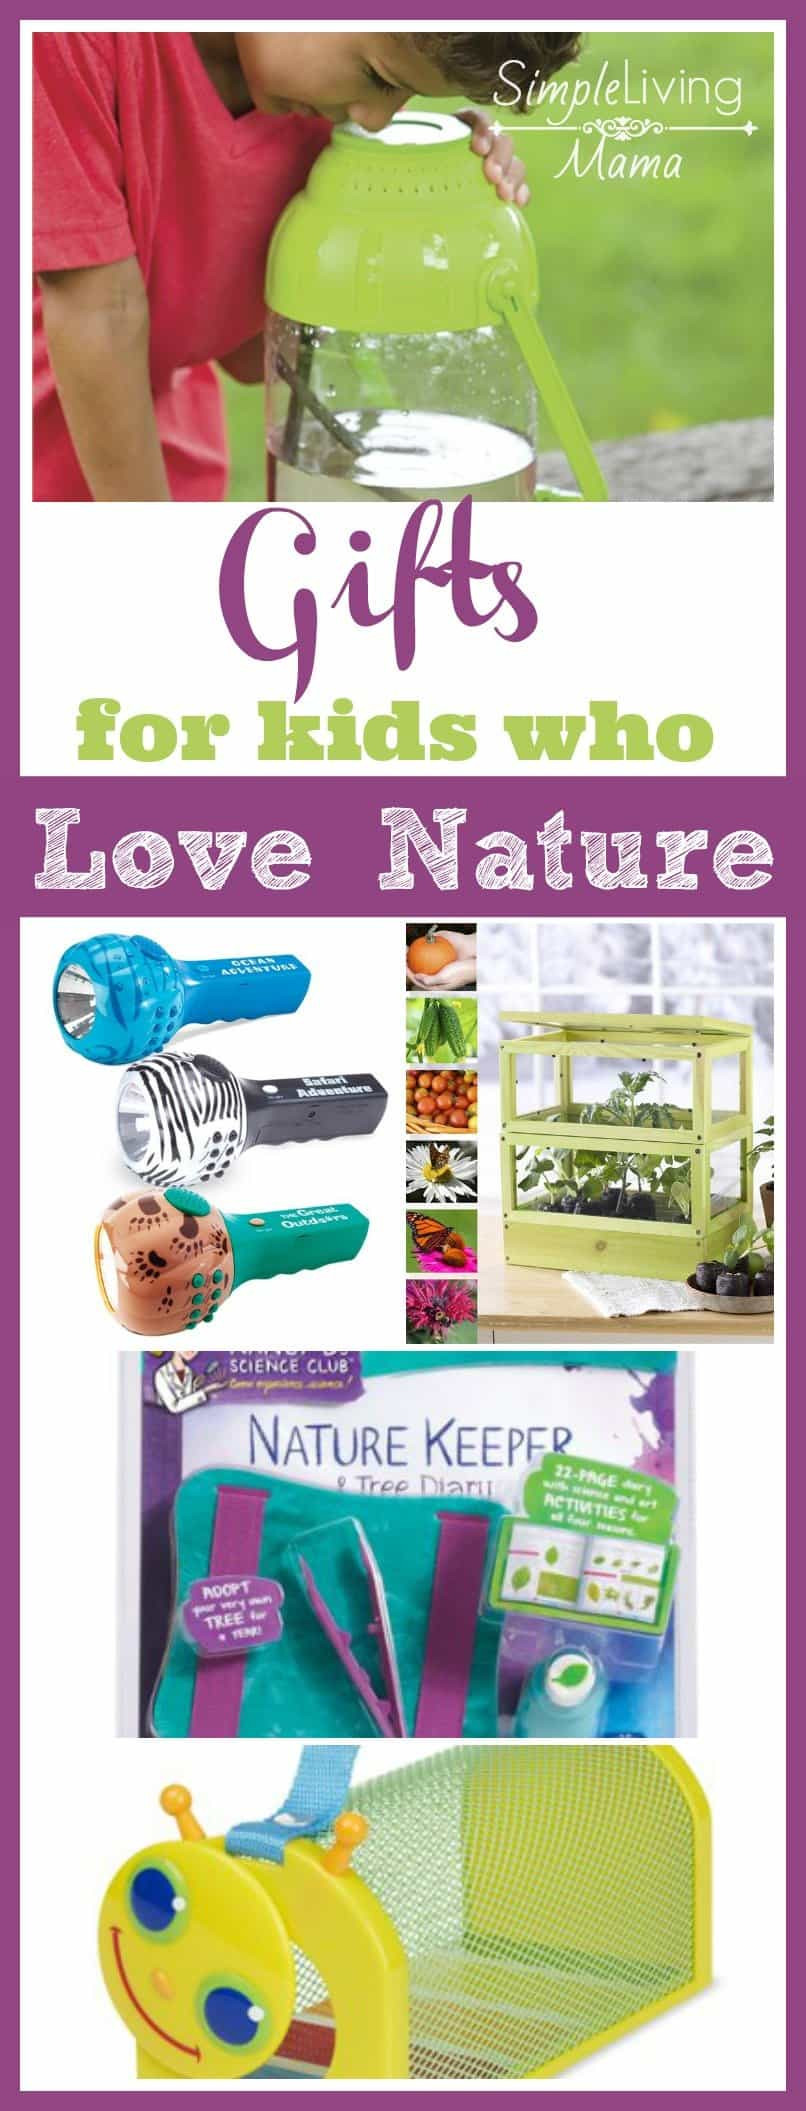 Nature Gifts For Kids
 Amazing Gifts for Kids Who Love Nature Simple Living Mama